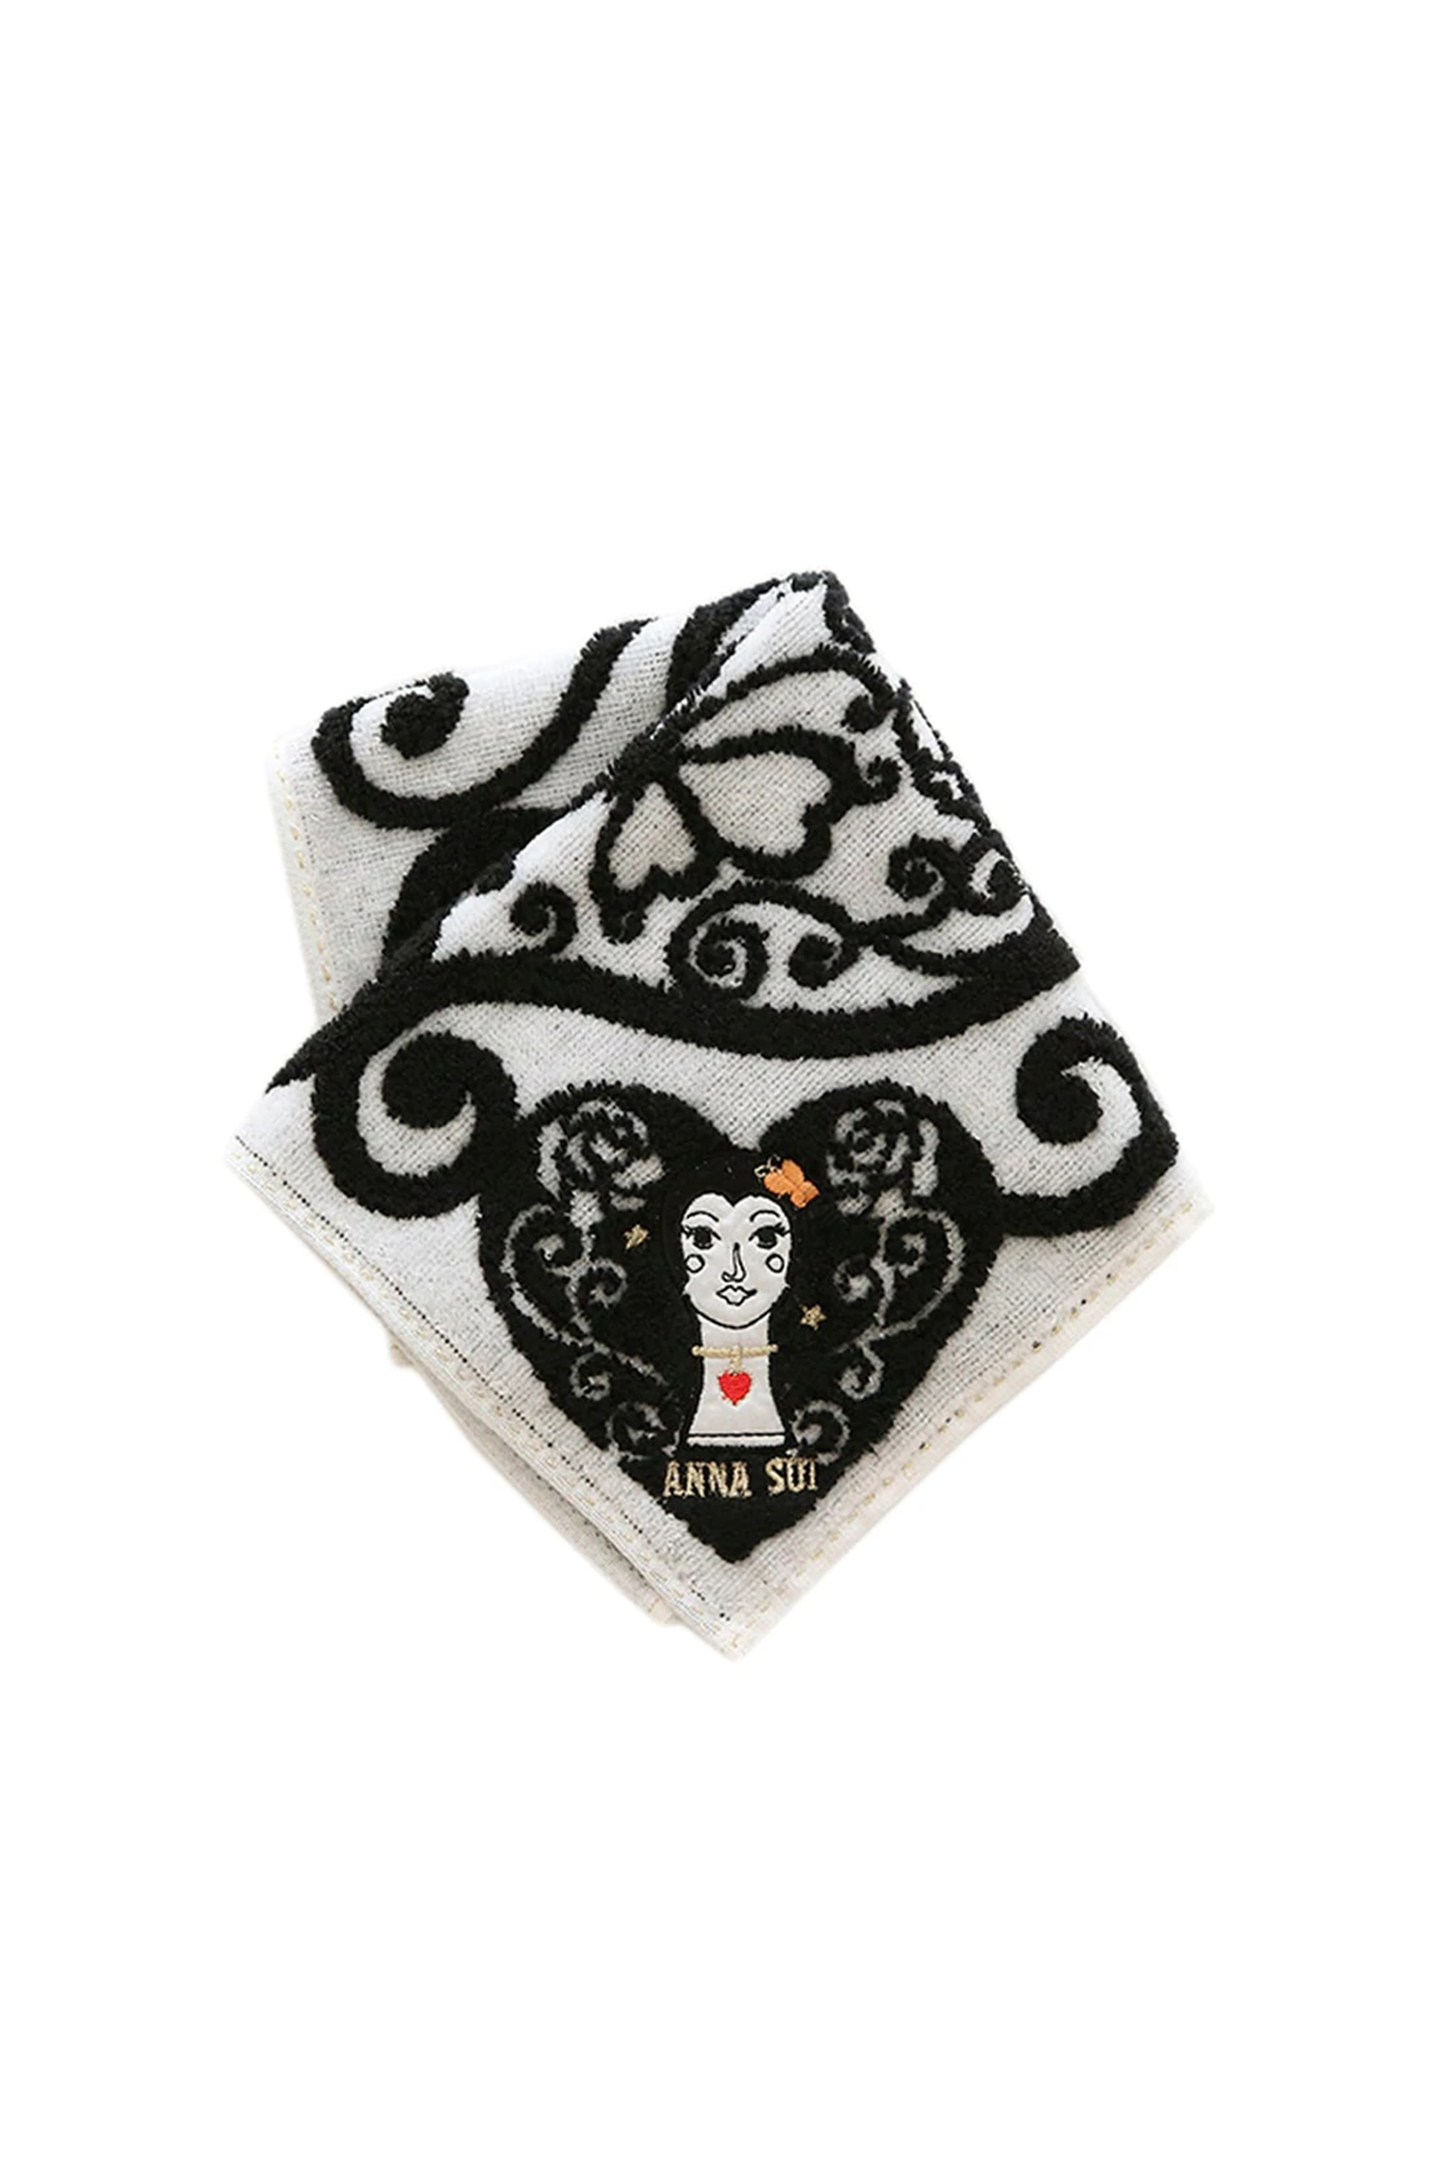 Dolly Head Washcloth, white, embroidery black heart in corners with and Anna Sui’s doll inside